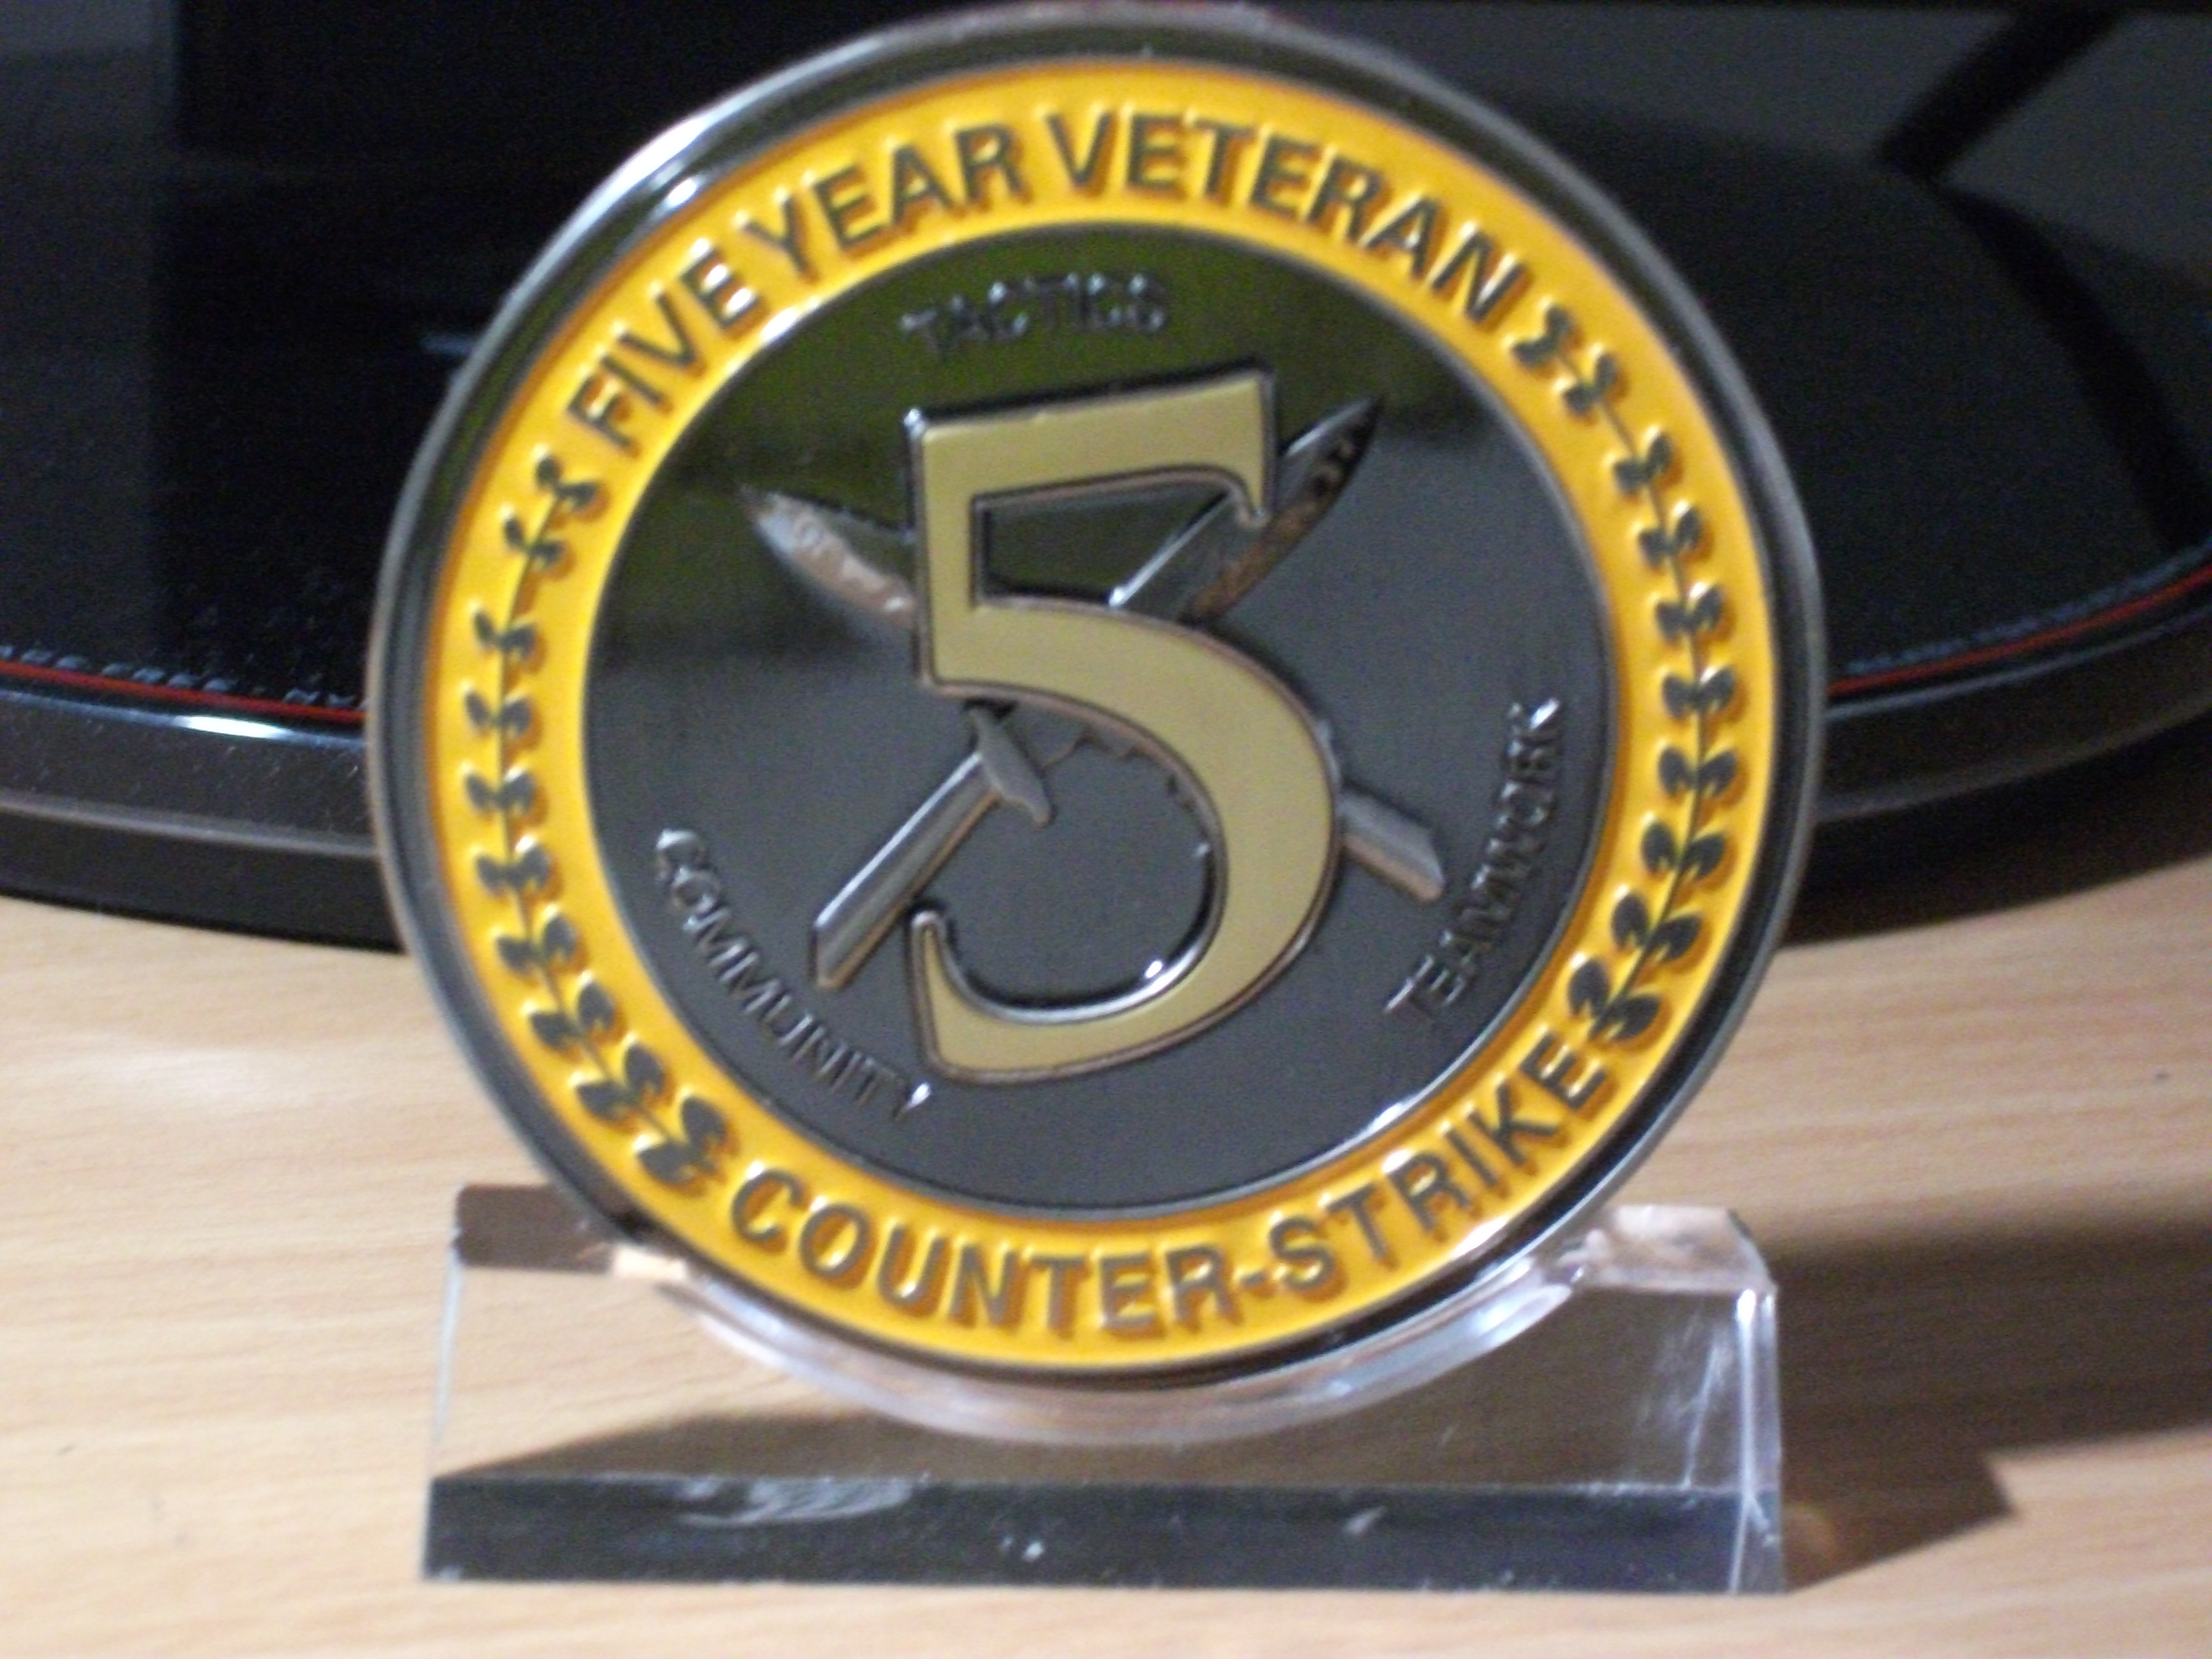 Unboxing my 5 year veteran coin from CS:GO - 5 year veteran coin post - Imgur